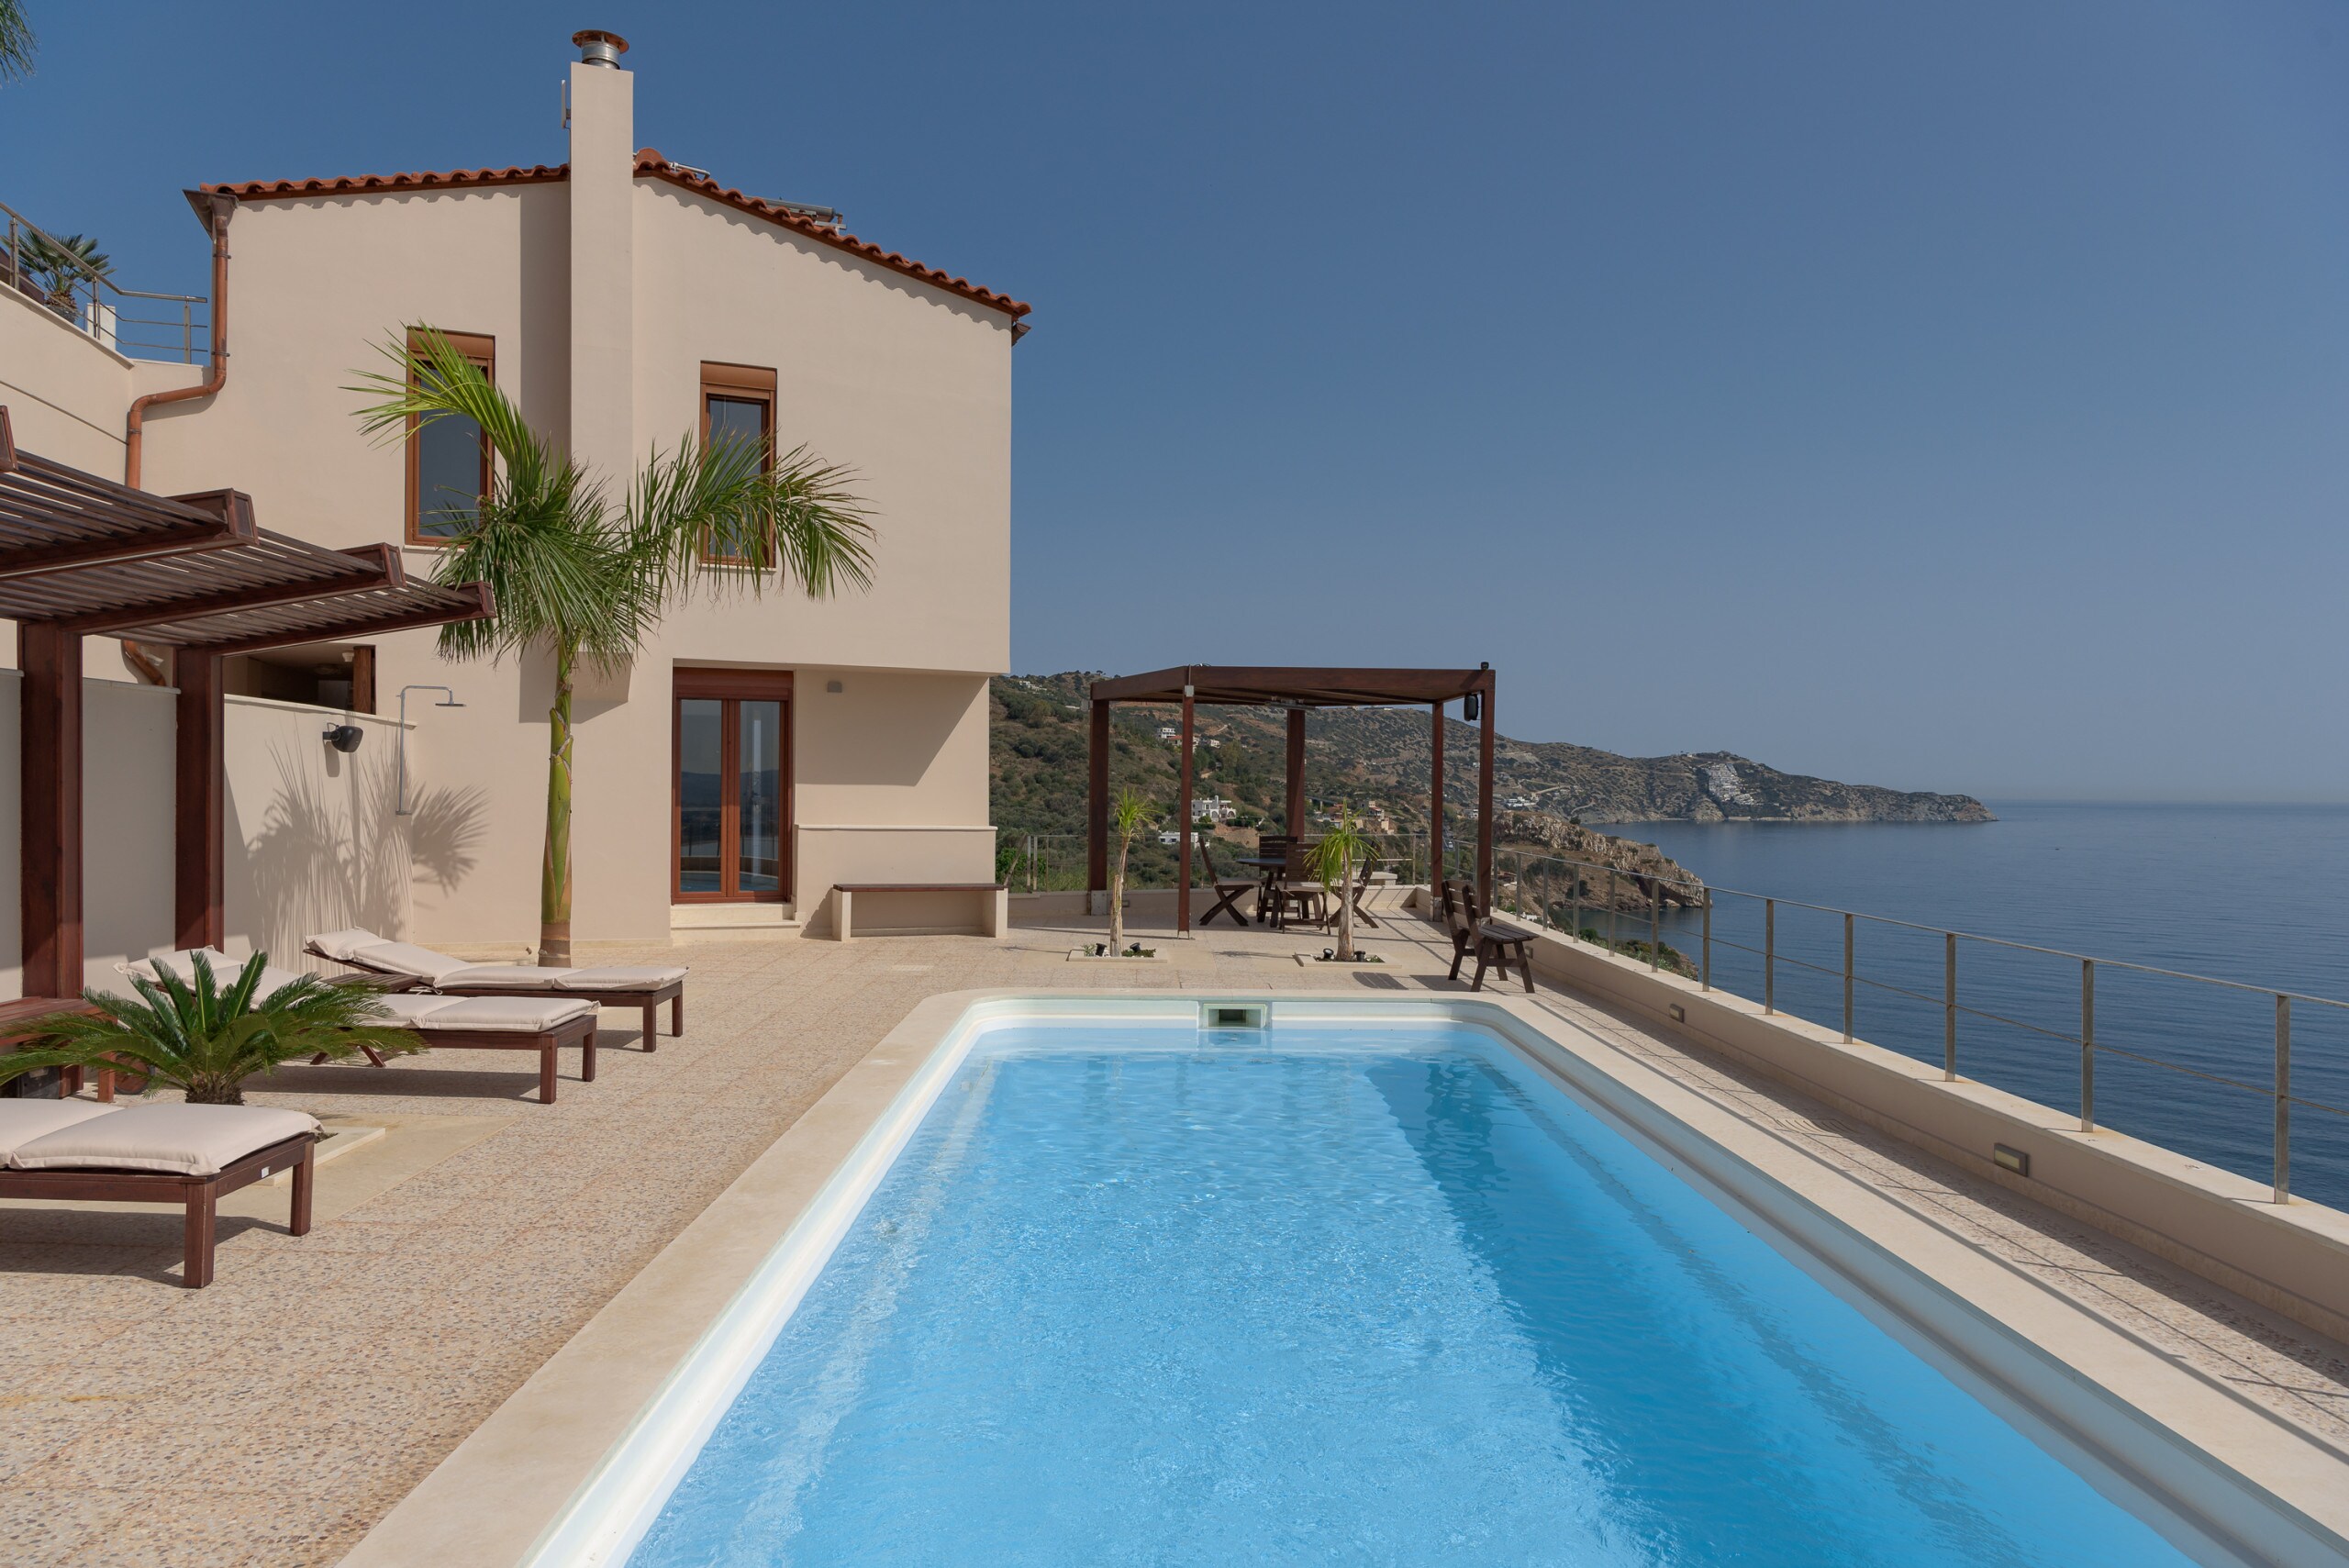 Iconic pool settings, featuring spectacular sea views.